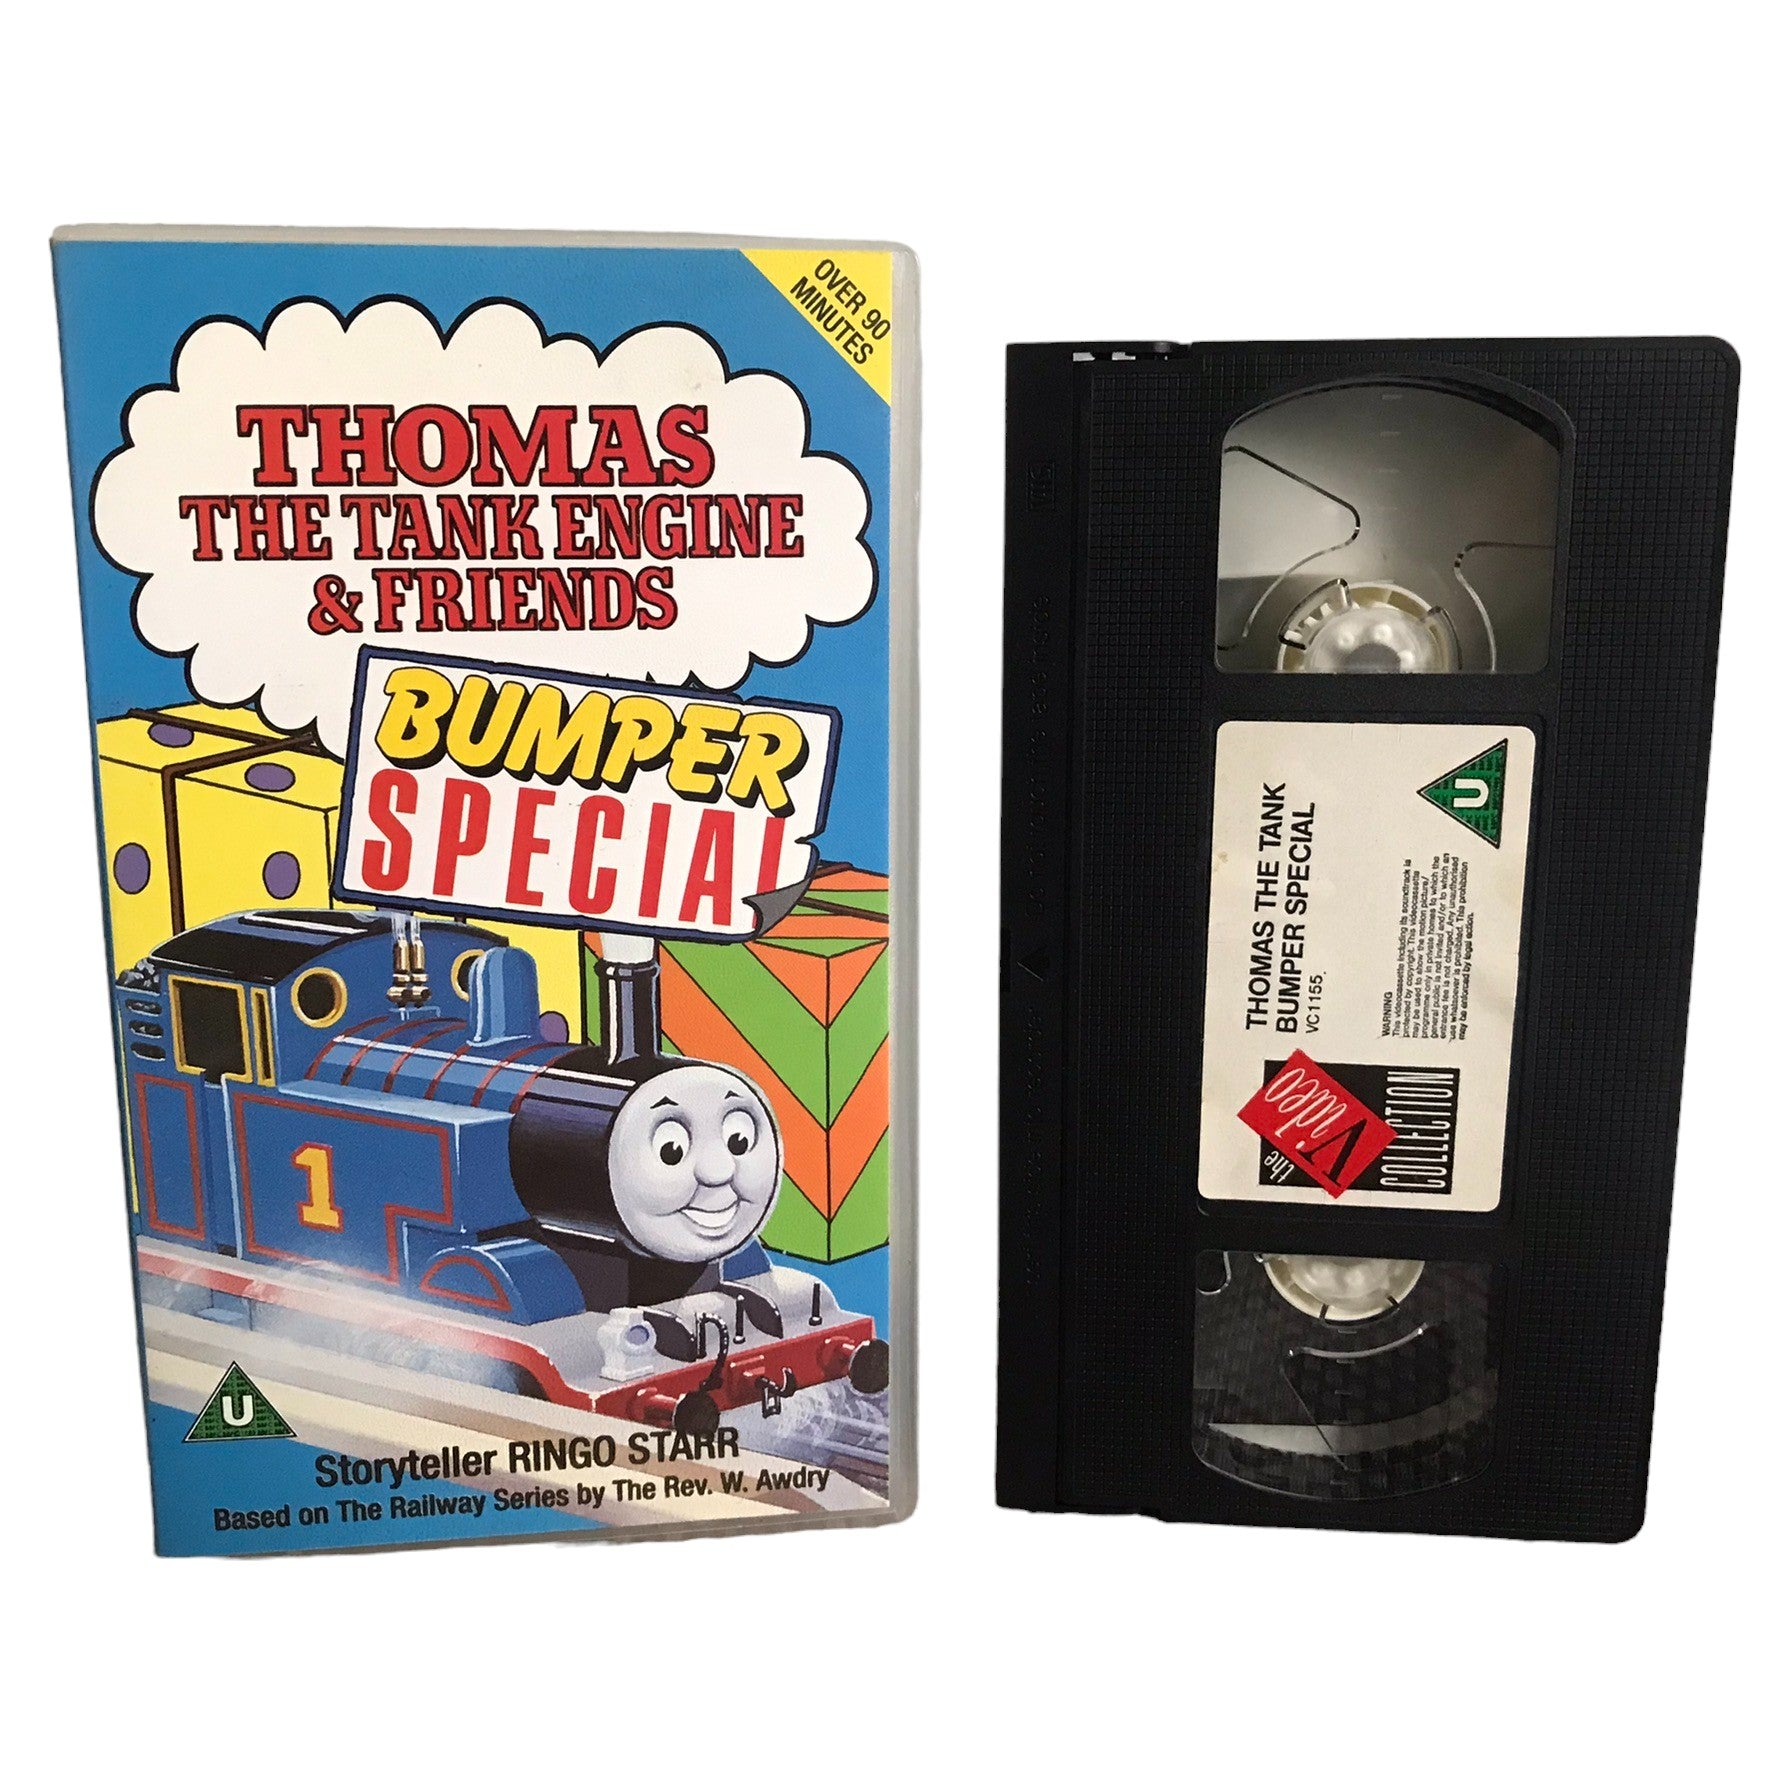 Thomas The Tank Engine & Friends Bumper Special - George Carlin - The Video Collection - Childrens - Pal - VHS-